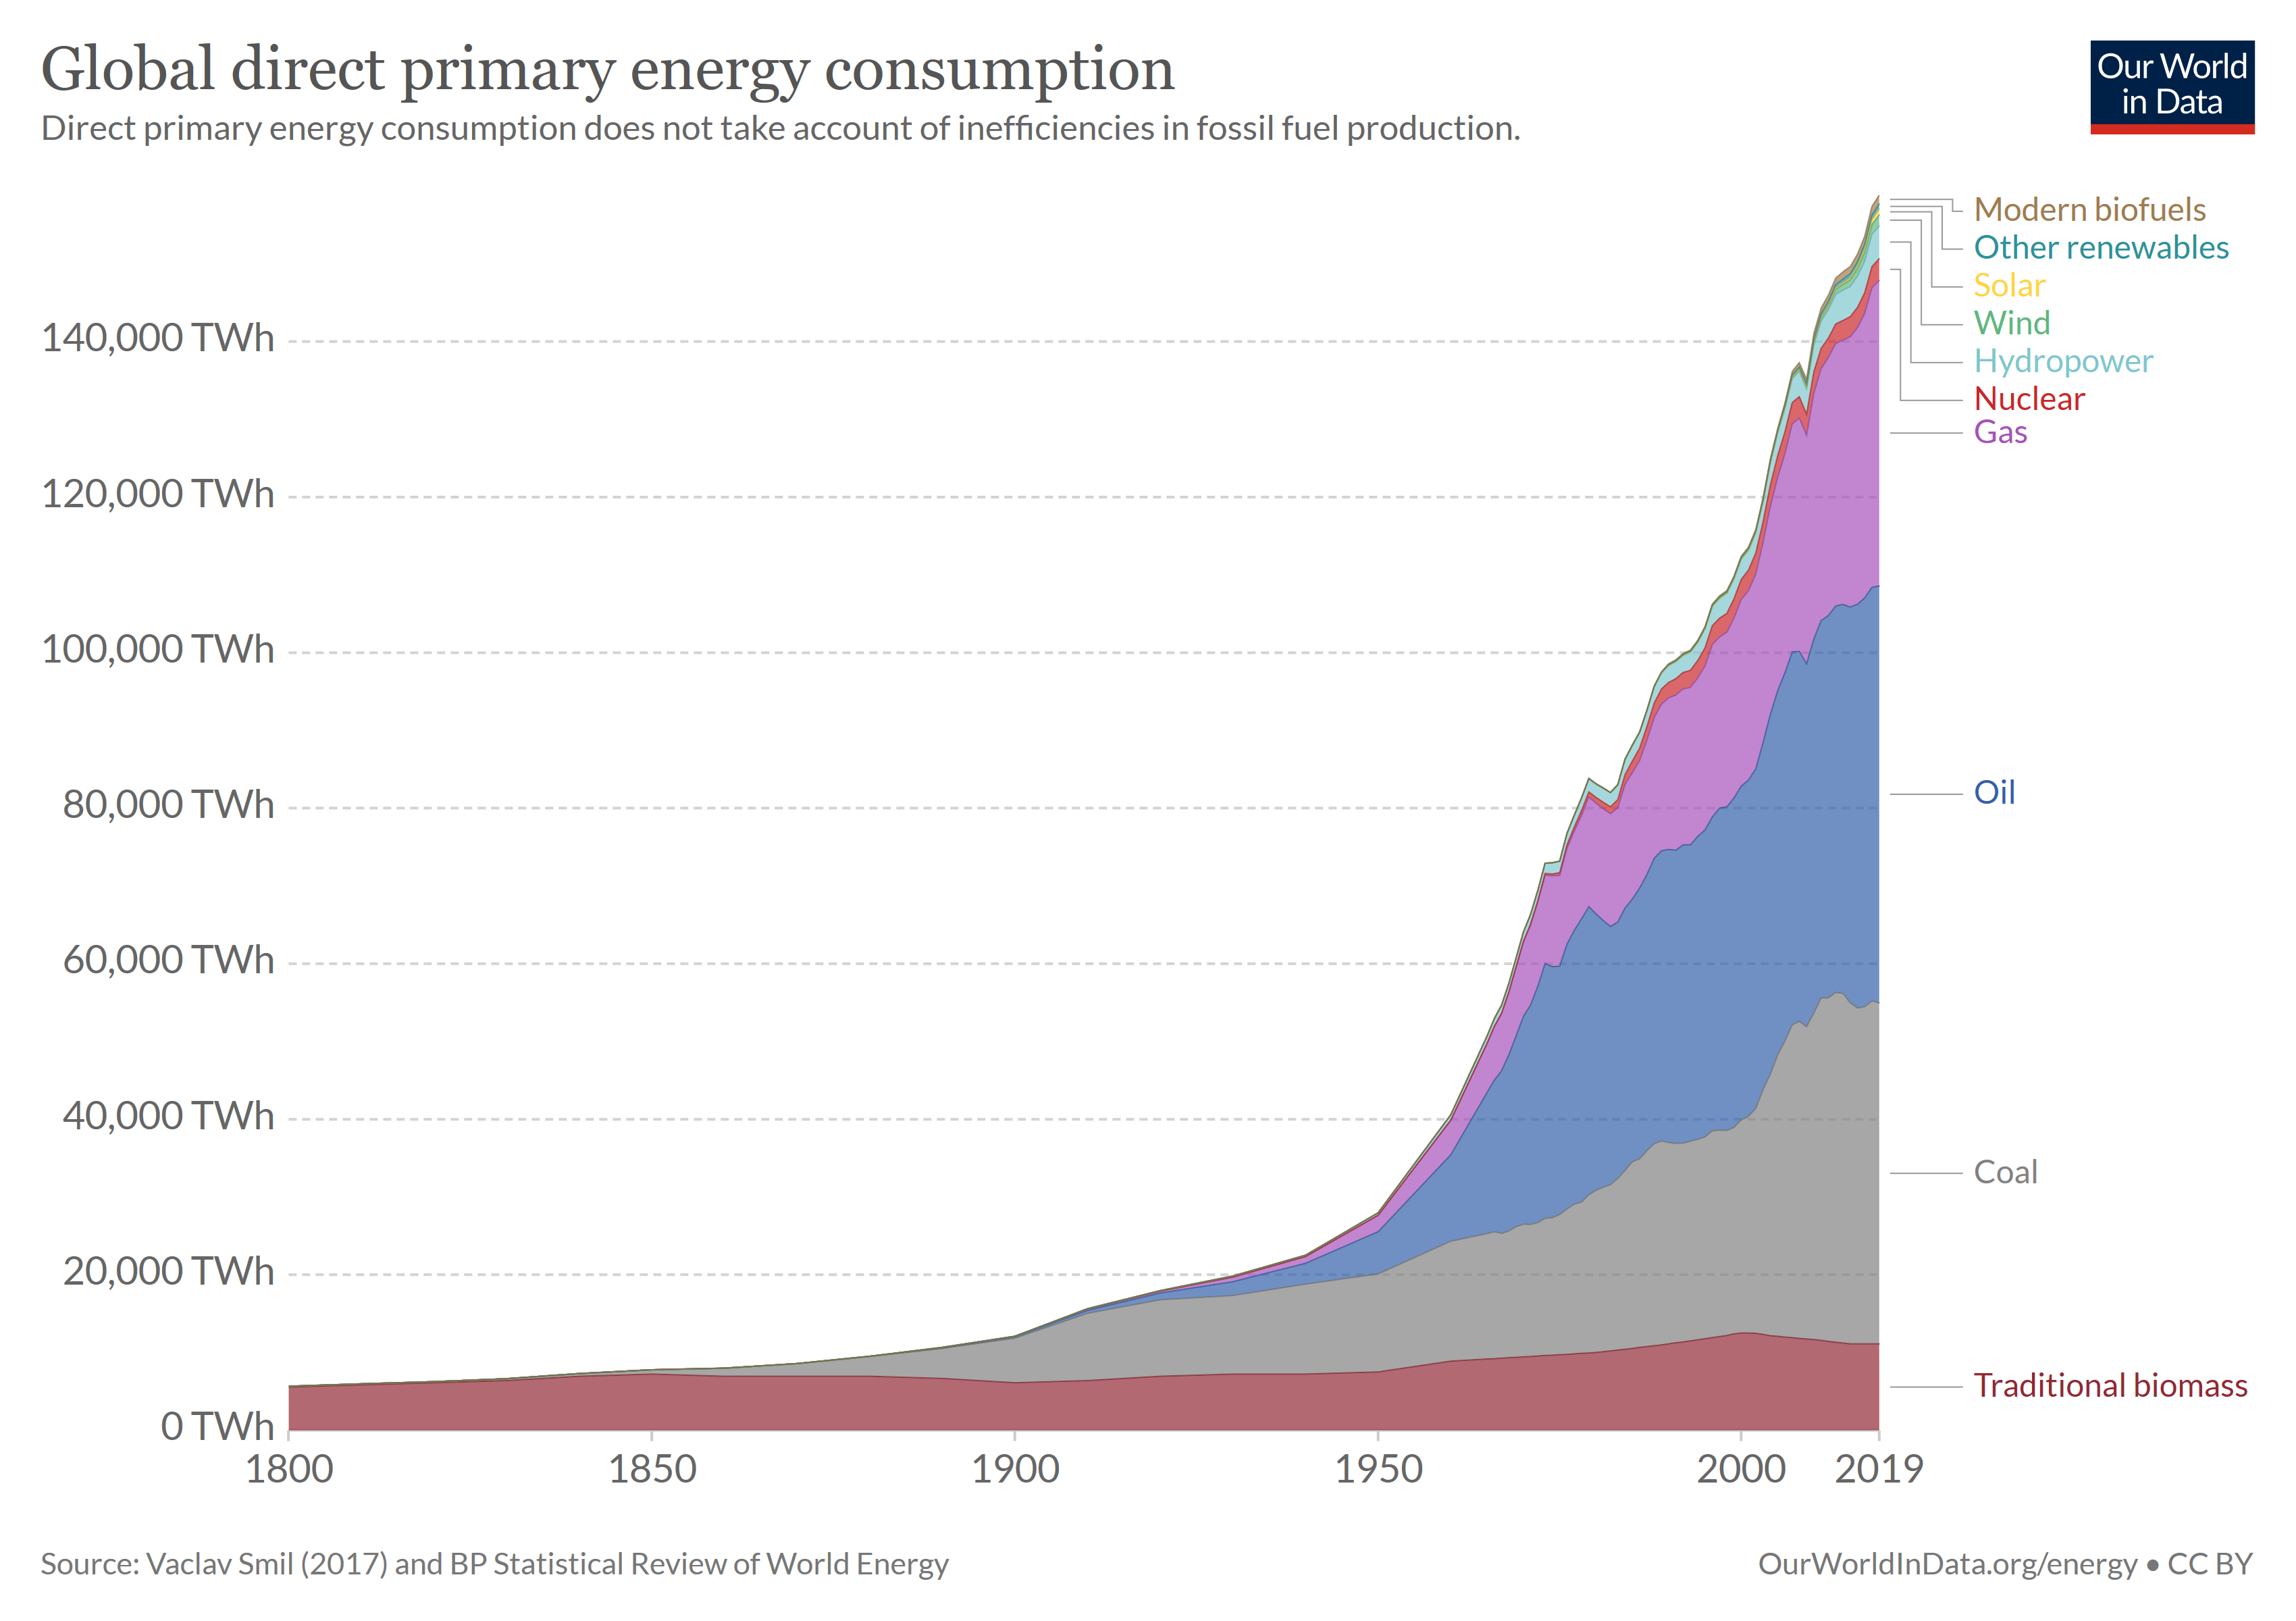 Global Primary Energy Consumption 1800 - 2019